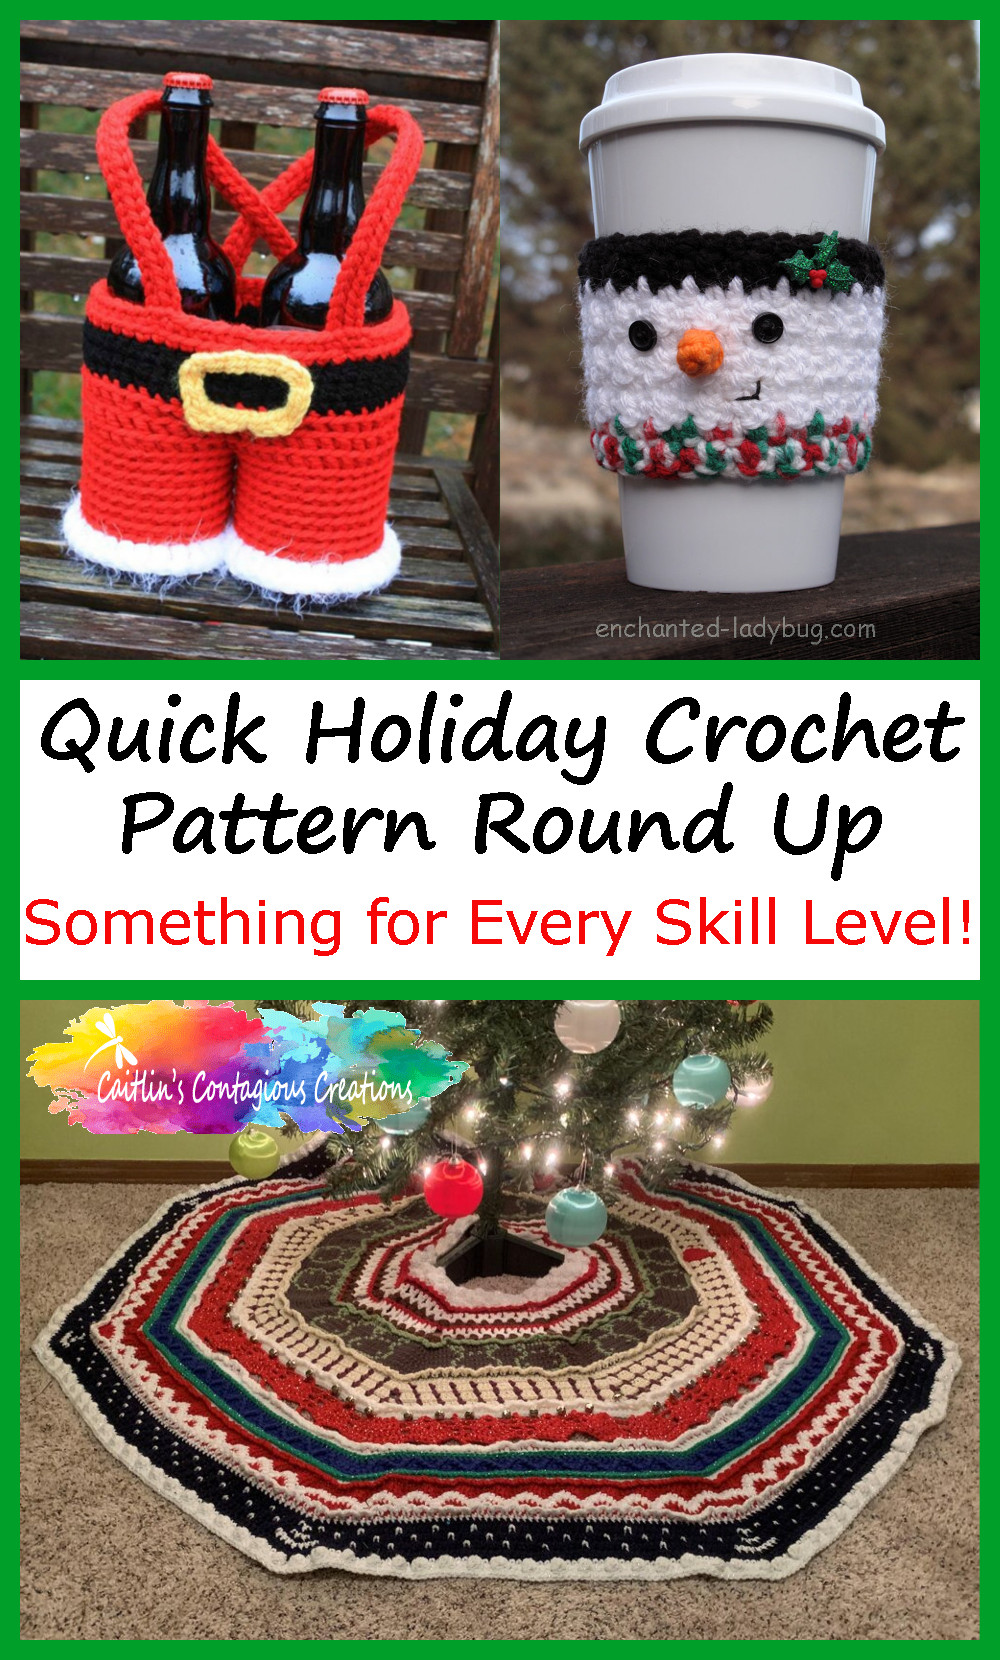 Quick Holiday Crochet Pattern Round Up Including DK, Aran, Worsted, and Bulky weight yarn stash busters